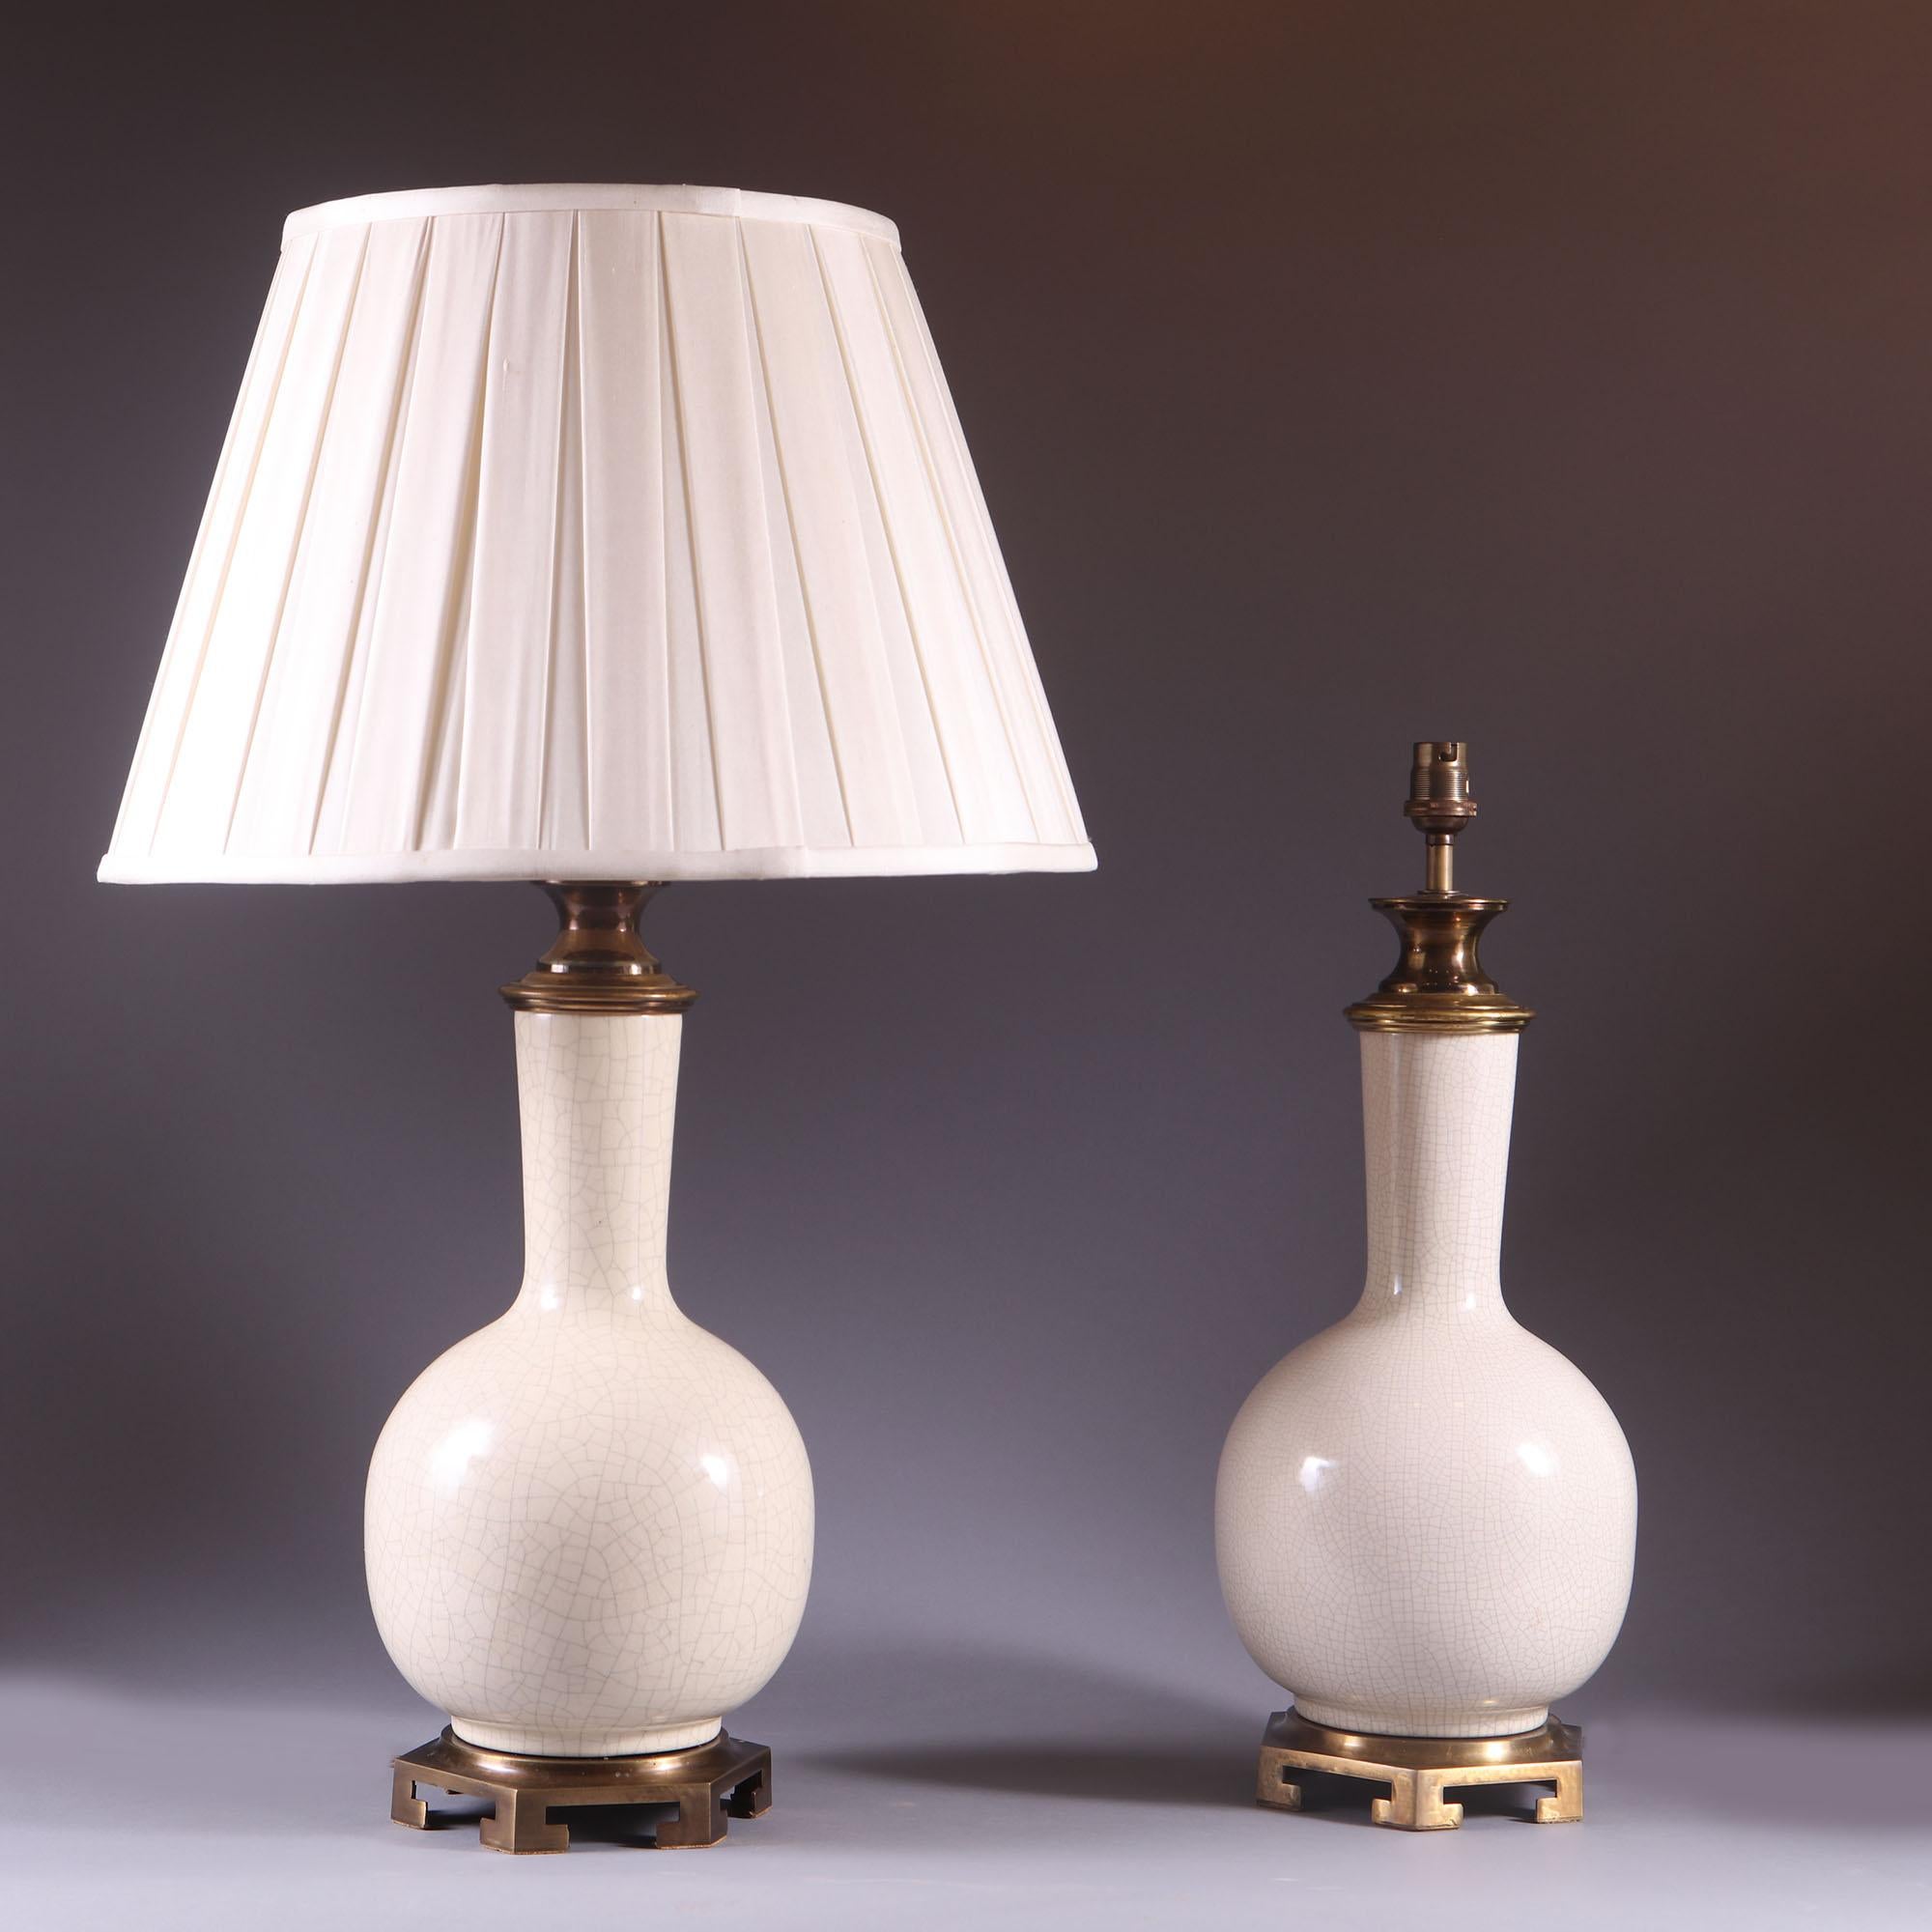 Pair of late 19th century Crackleware lamps on gilt bronze bases.
These beautiful vases hold a bulb shape with the crackle patterning around the whole base of the vase. They are an elegant off white tone offset by the gilt bronze to the base and